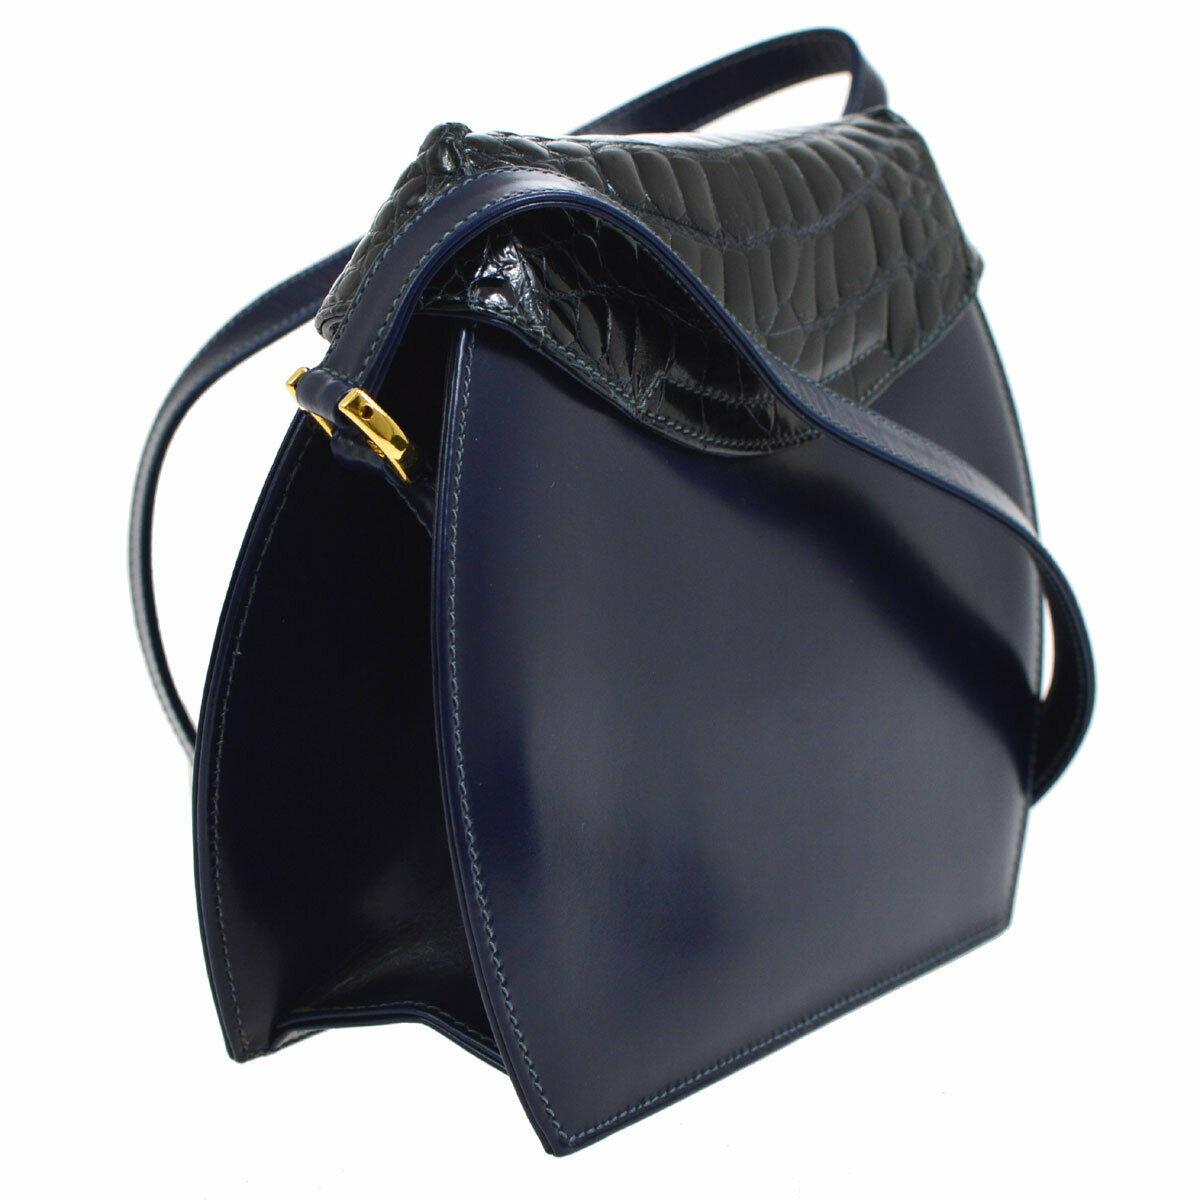 Gucci Navy Blue Leather Crocodile Exotic Trim Saddle Evening Shoulder Flap Bag in Box

Leather
Crocodile trim
Gold tone hardware
Turnlock closure
Leather lining
Made in Italy
Shoulder strap drop 20.5-21.5